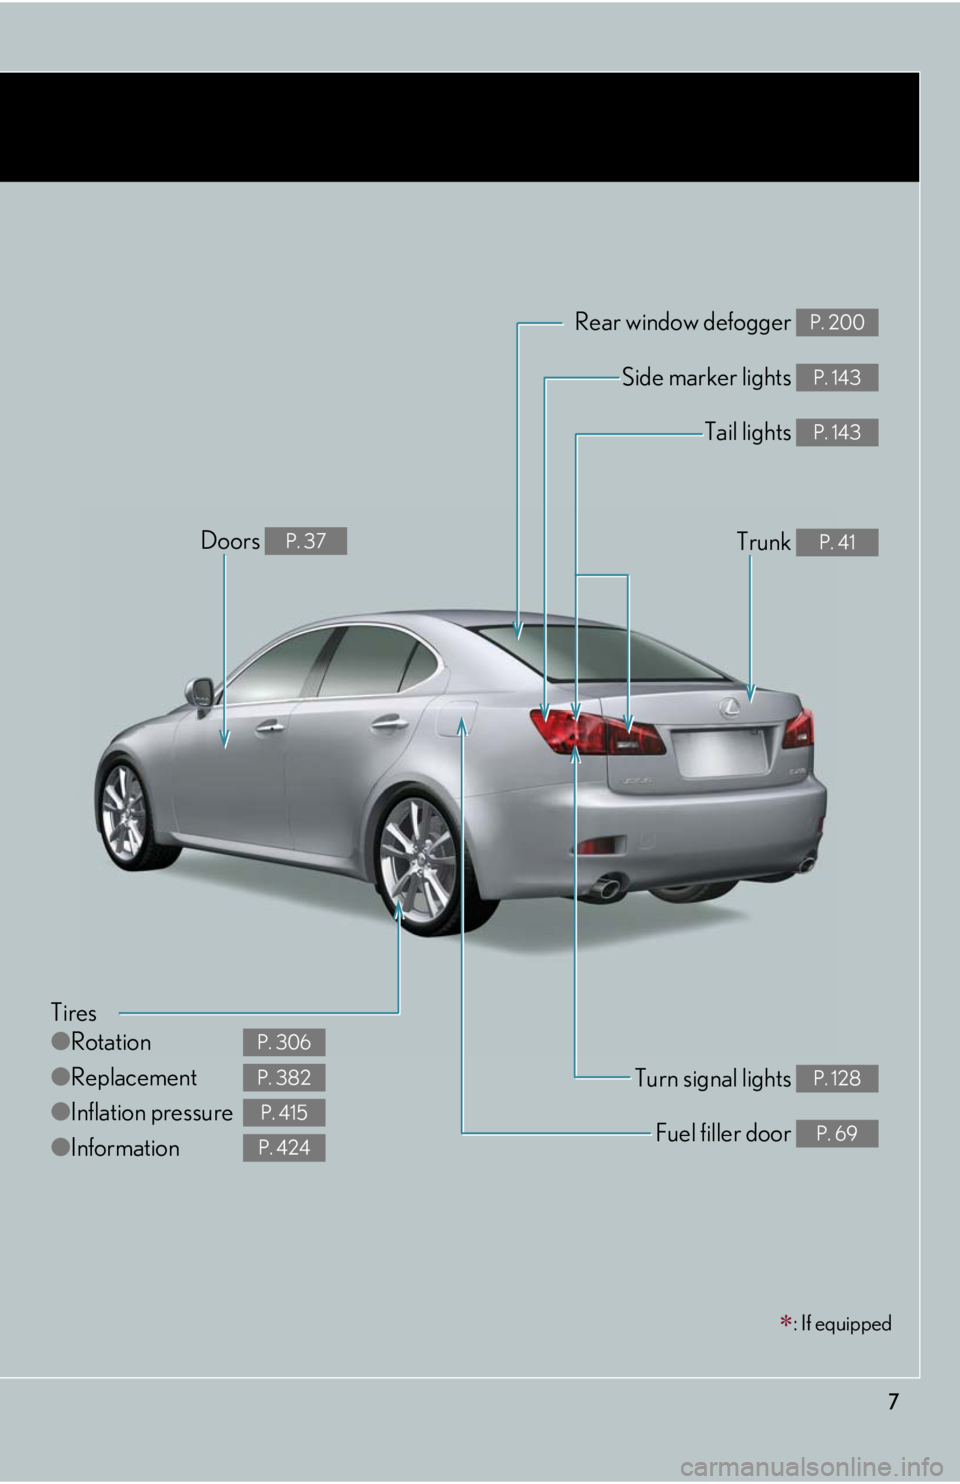 Lexus IS250 2008  Using the audio system / LEXUS 2008 IS250 OWNERS MANUAL (OM53699U) 7
: If equipped
Tires
●Rotation
● Replacement
● Inflation pressure
● Information
P. 306
P. 382
P. 415
P. 424
Tail lights P. 143
Side marker lights P. 143
Trunk P. 41
Rear window defogger P.